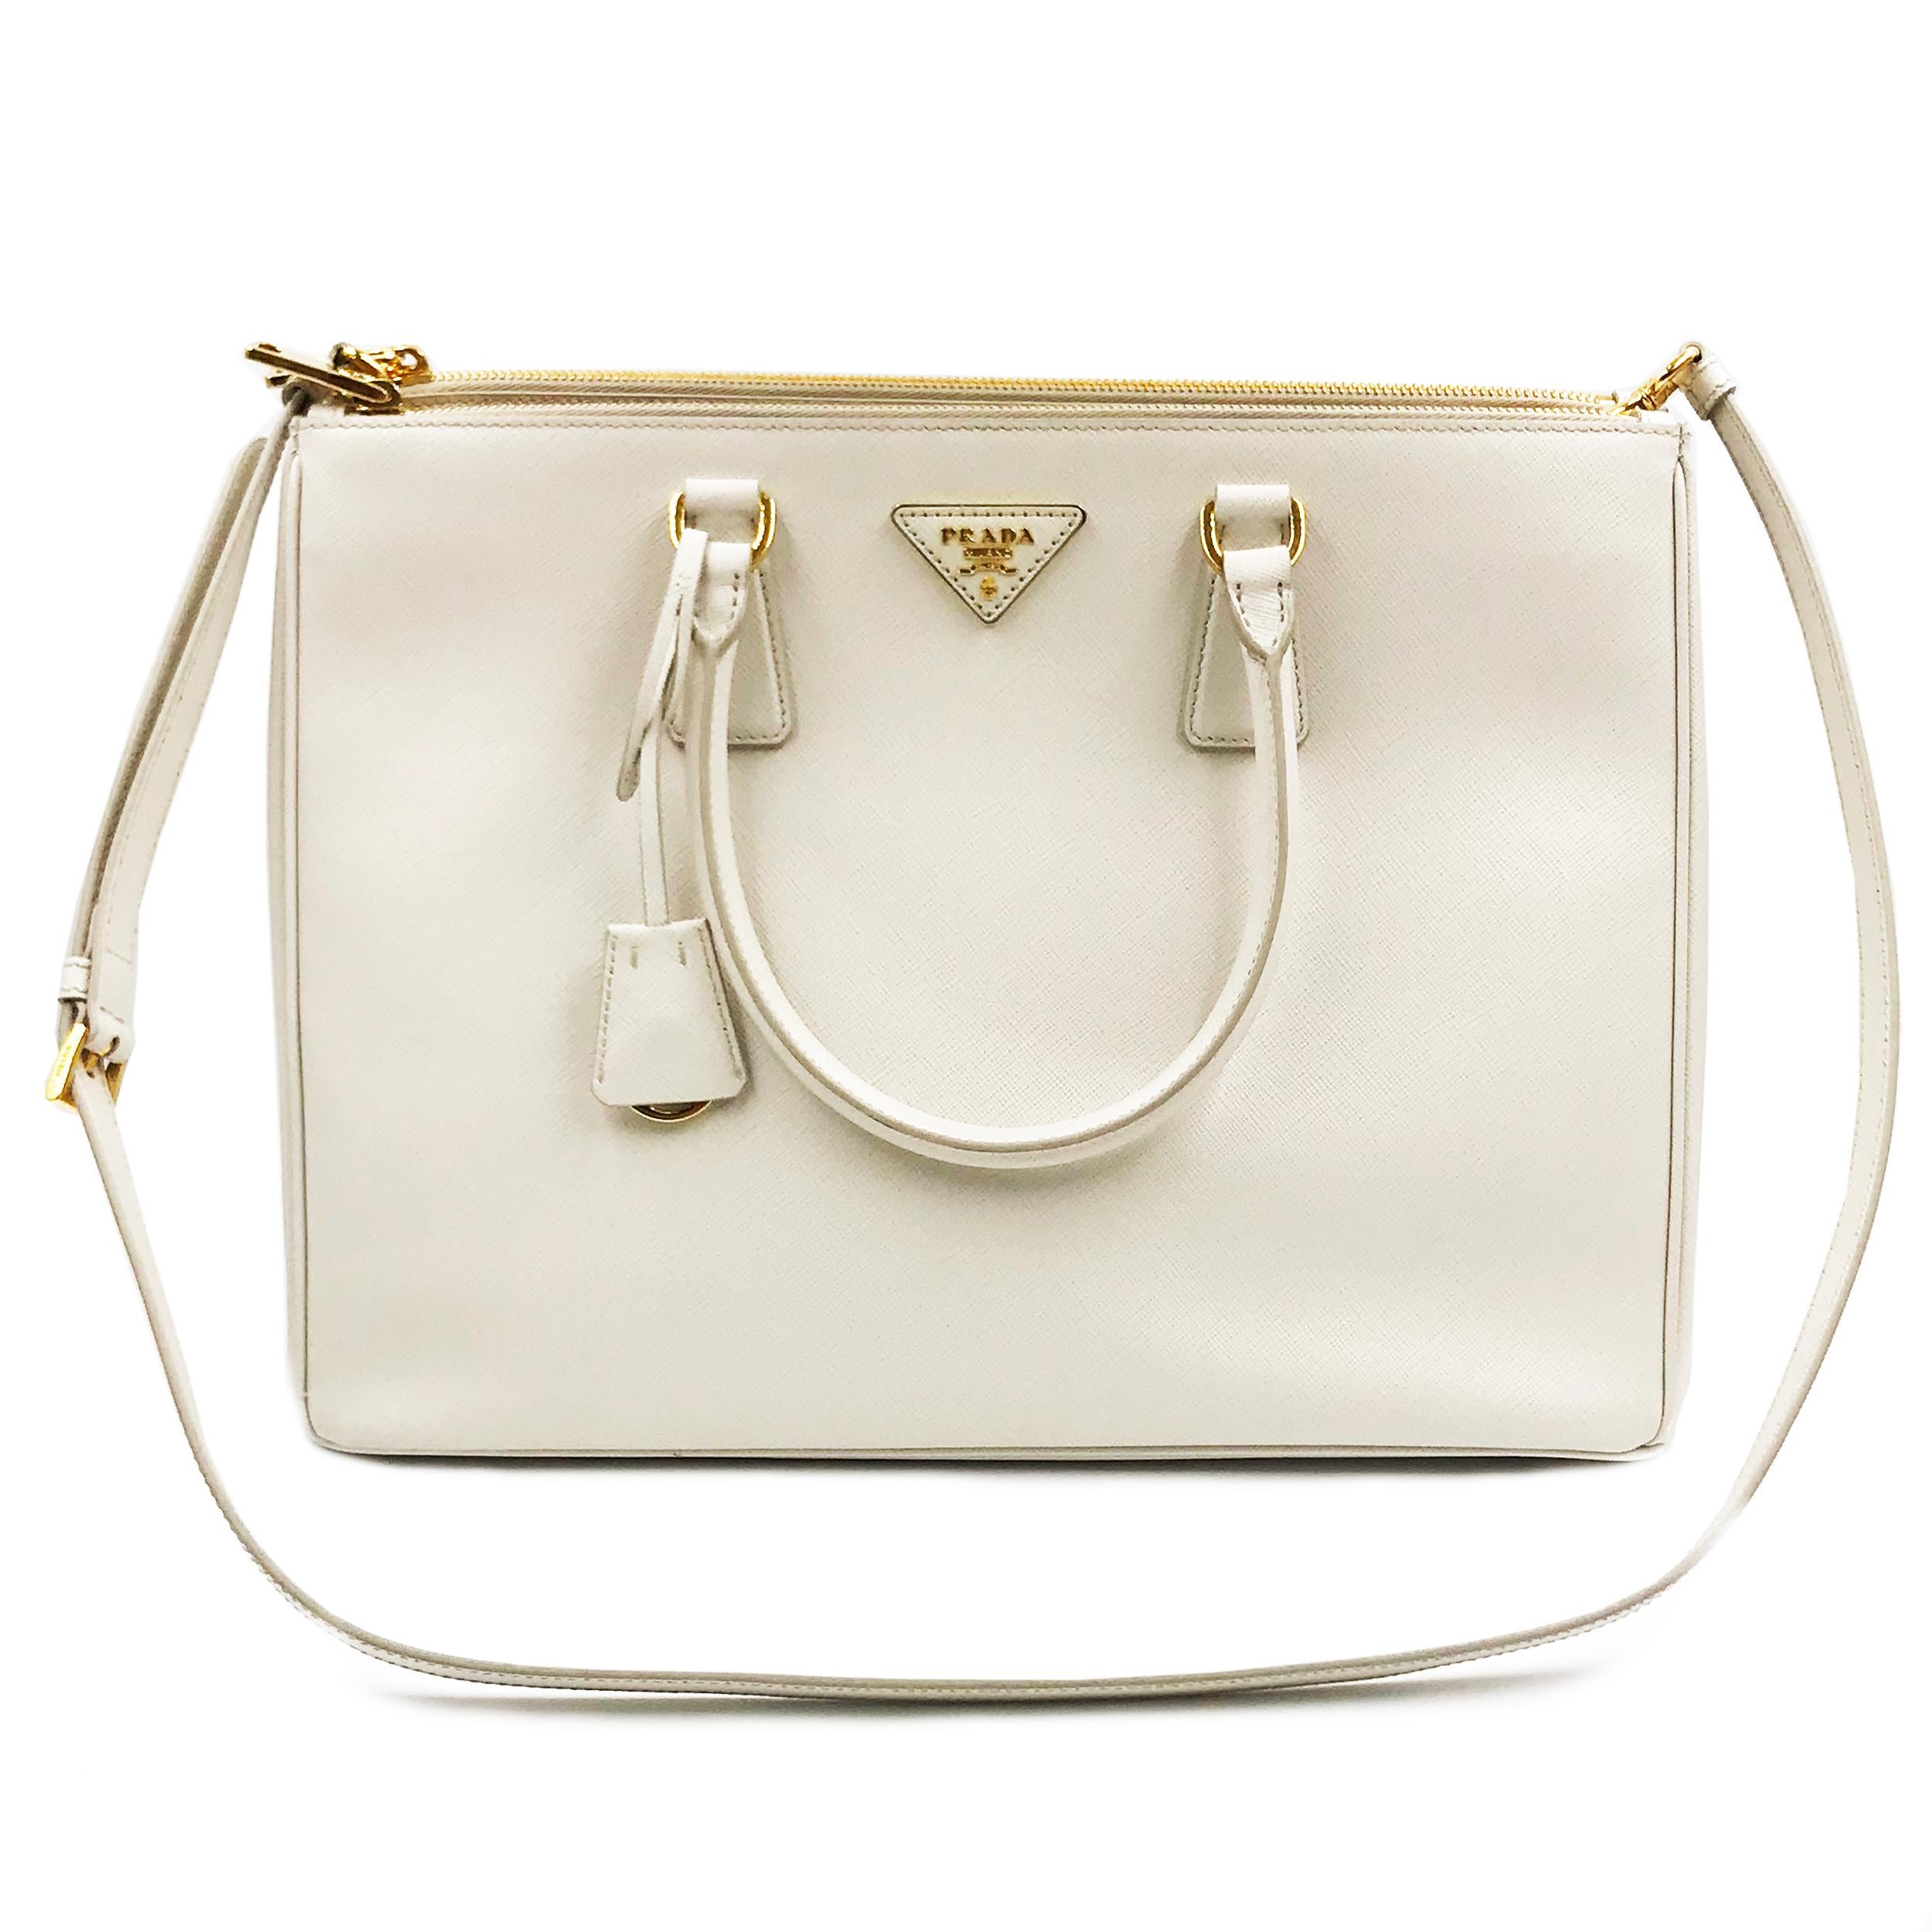 Prada's Galleria saffiano tote is a perfectly prim addition to your accessories edit. Crafted from textured white calf leather, this design is finished with dainty top handles and golden hardware. Double storage compartments leave ample room for